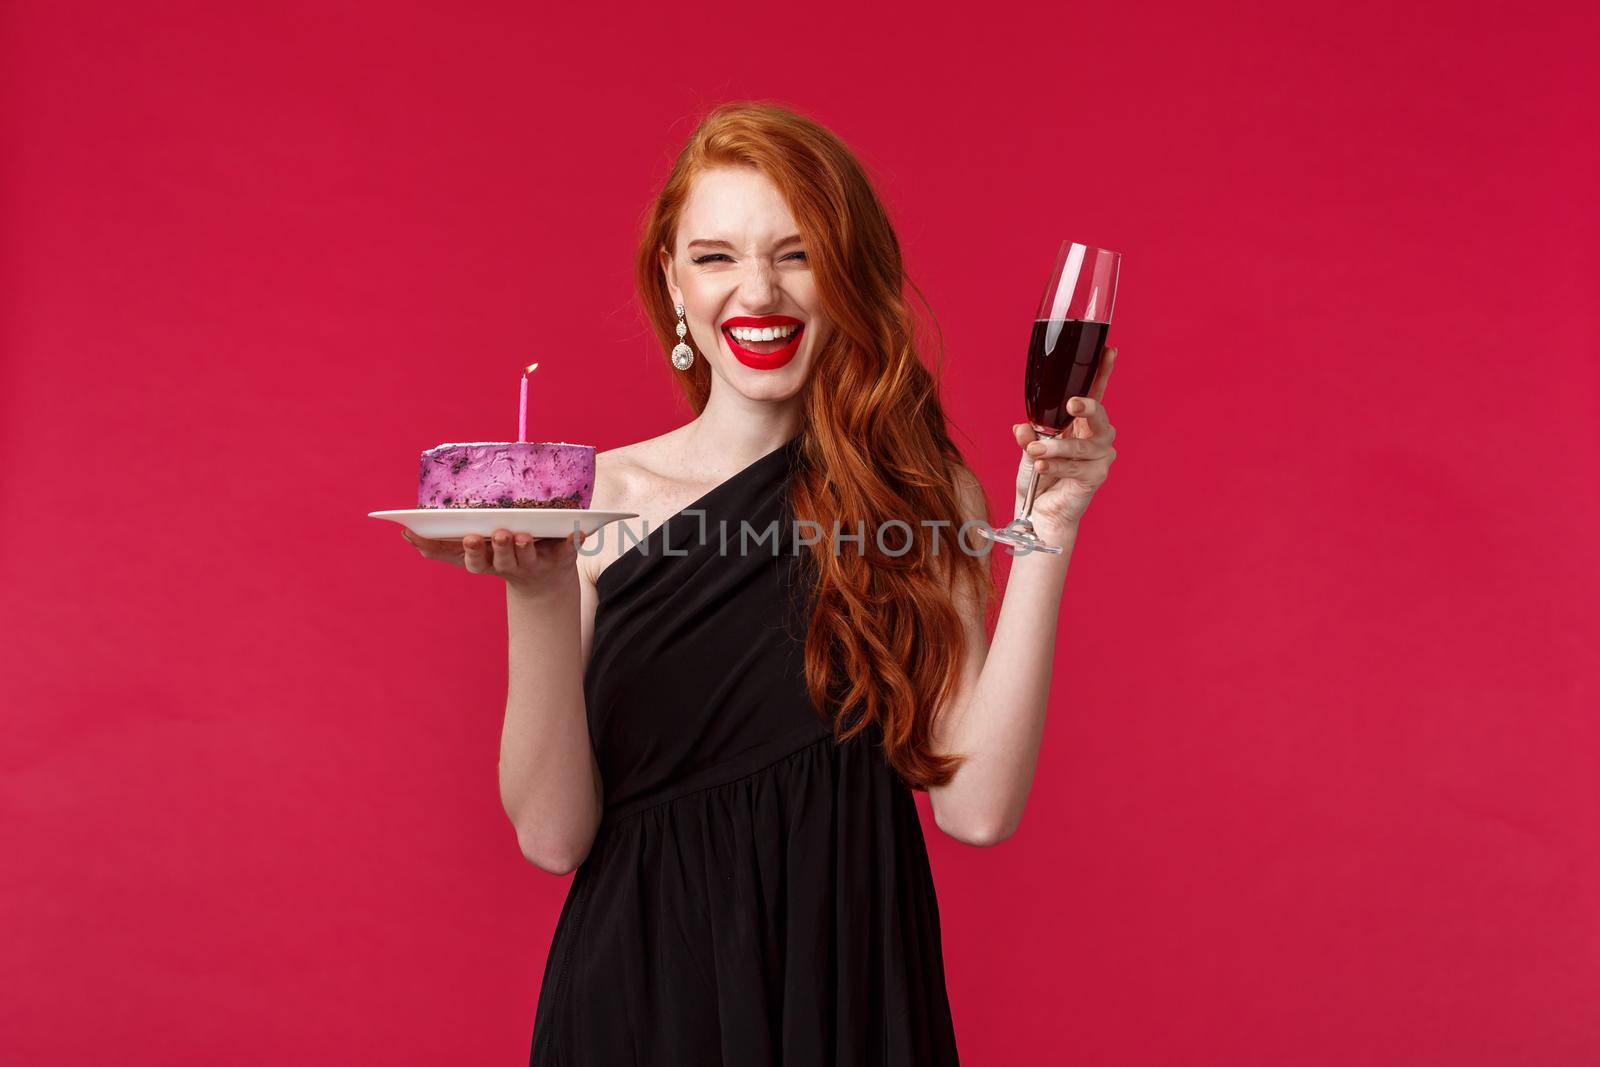 Portrait of excited laughing gorgeous redhead woman having fun at b-day party, holding glass of wine and birthday cake with lit candle, making wish, celebrating over red background.